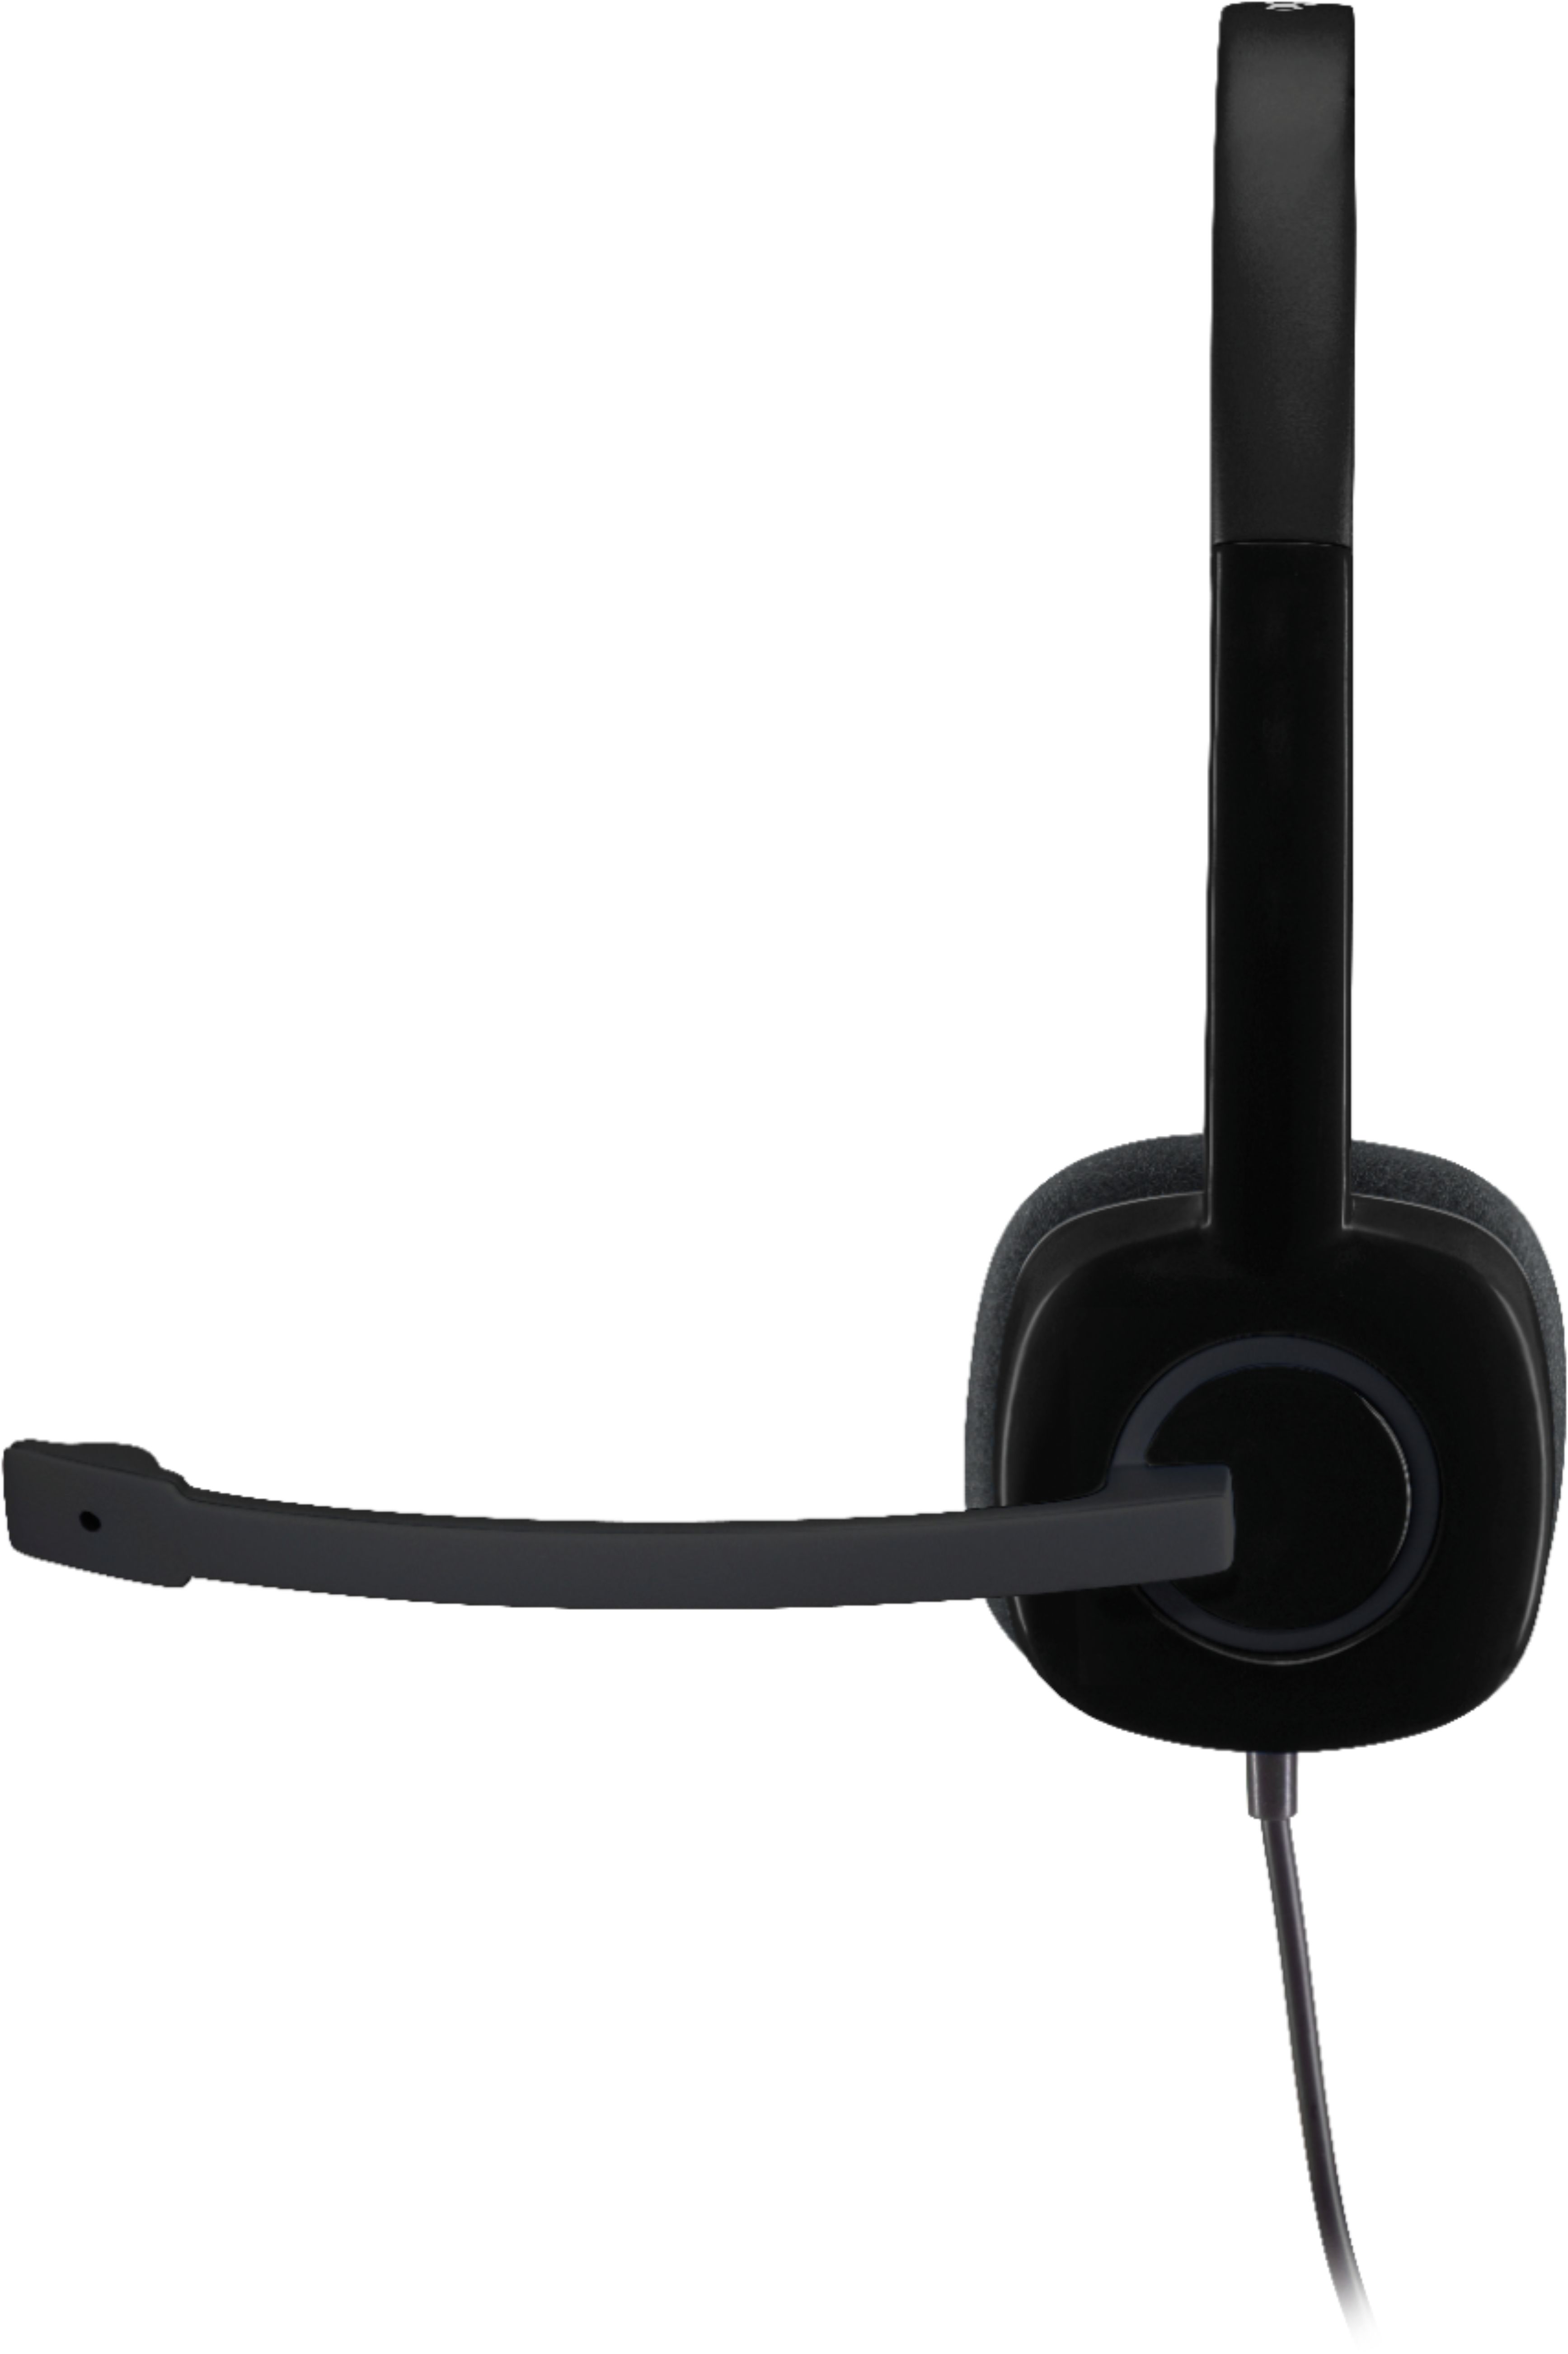 Left View: Microsoft - Modern Wireless Headset - On-Ear Headphones with Noise-Reducing Microphone, for Teams & Zoom - Black